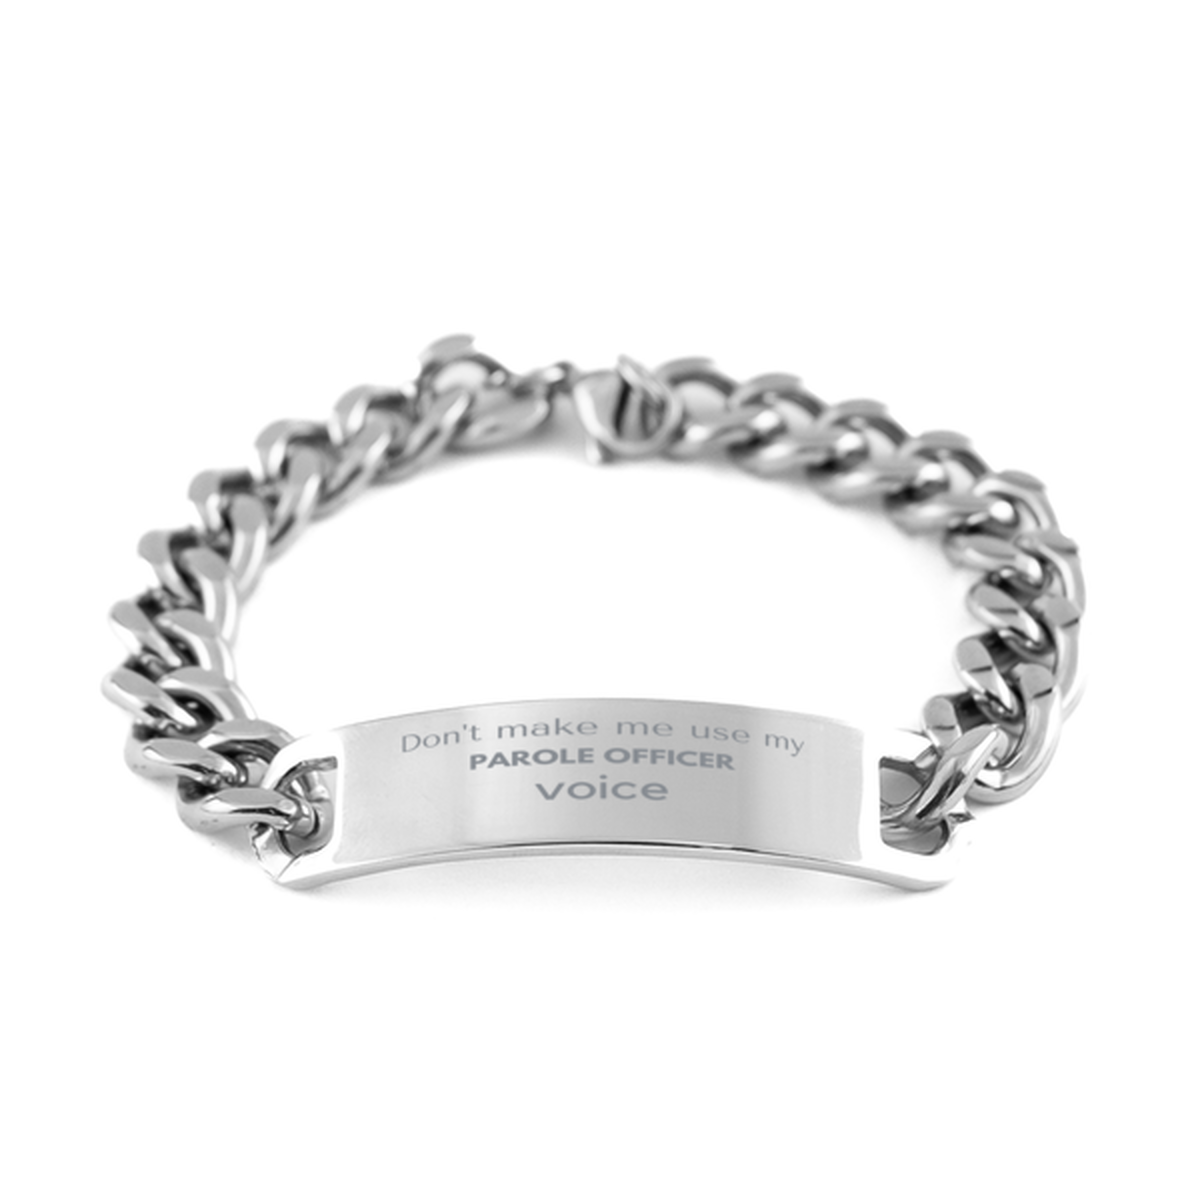 Don't make me use my Parole Officer voice, Sarcasm Parole Officer Gifts, Christmas Parole Officer Cuban Chain Stainless Steel Bracelet Birthday Unique Gifts For Parole Officer Coworkers, Men, Women, Colleague, Friends